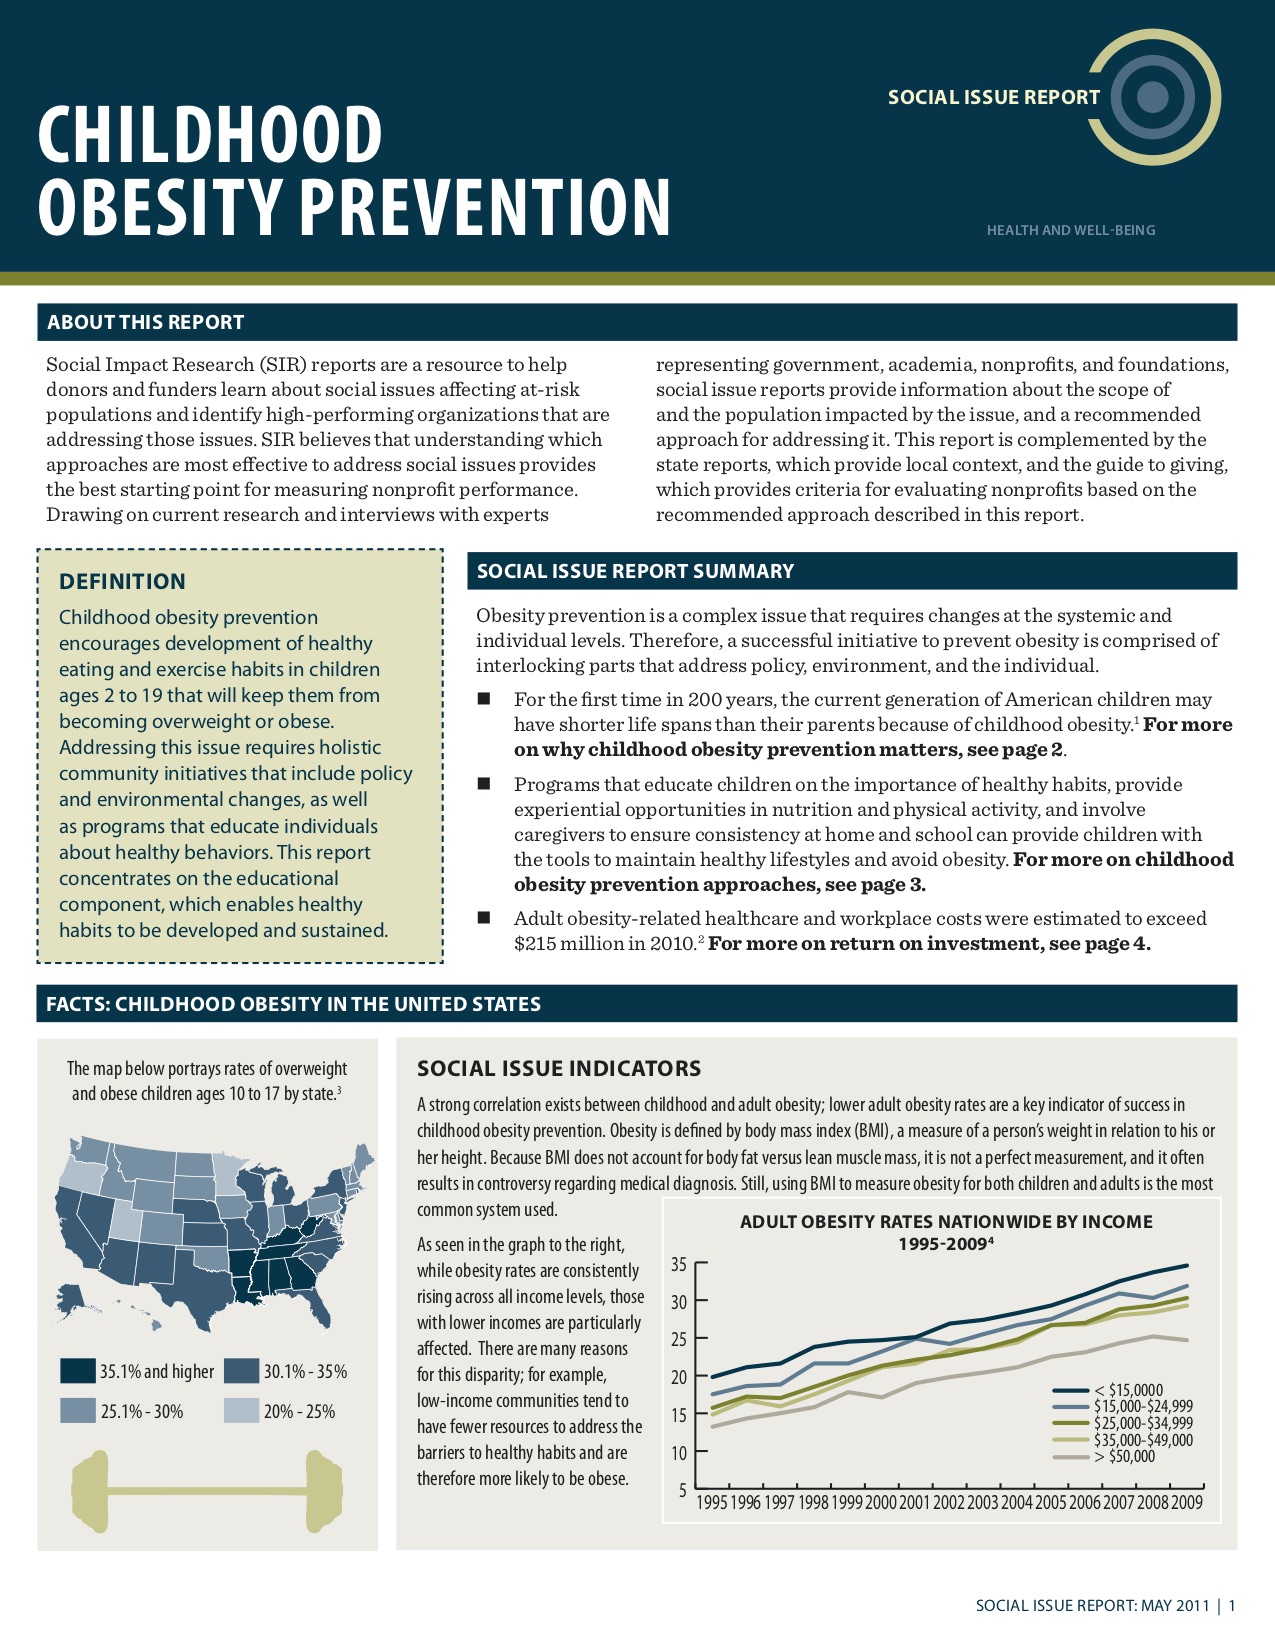 Childhood Obesity Prevention: Social Issue Report